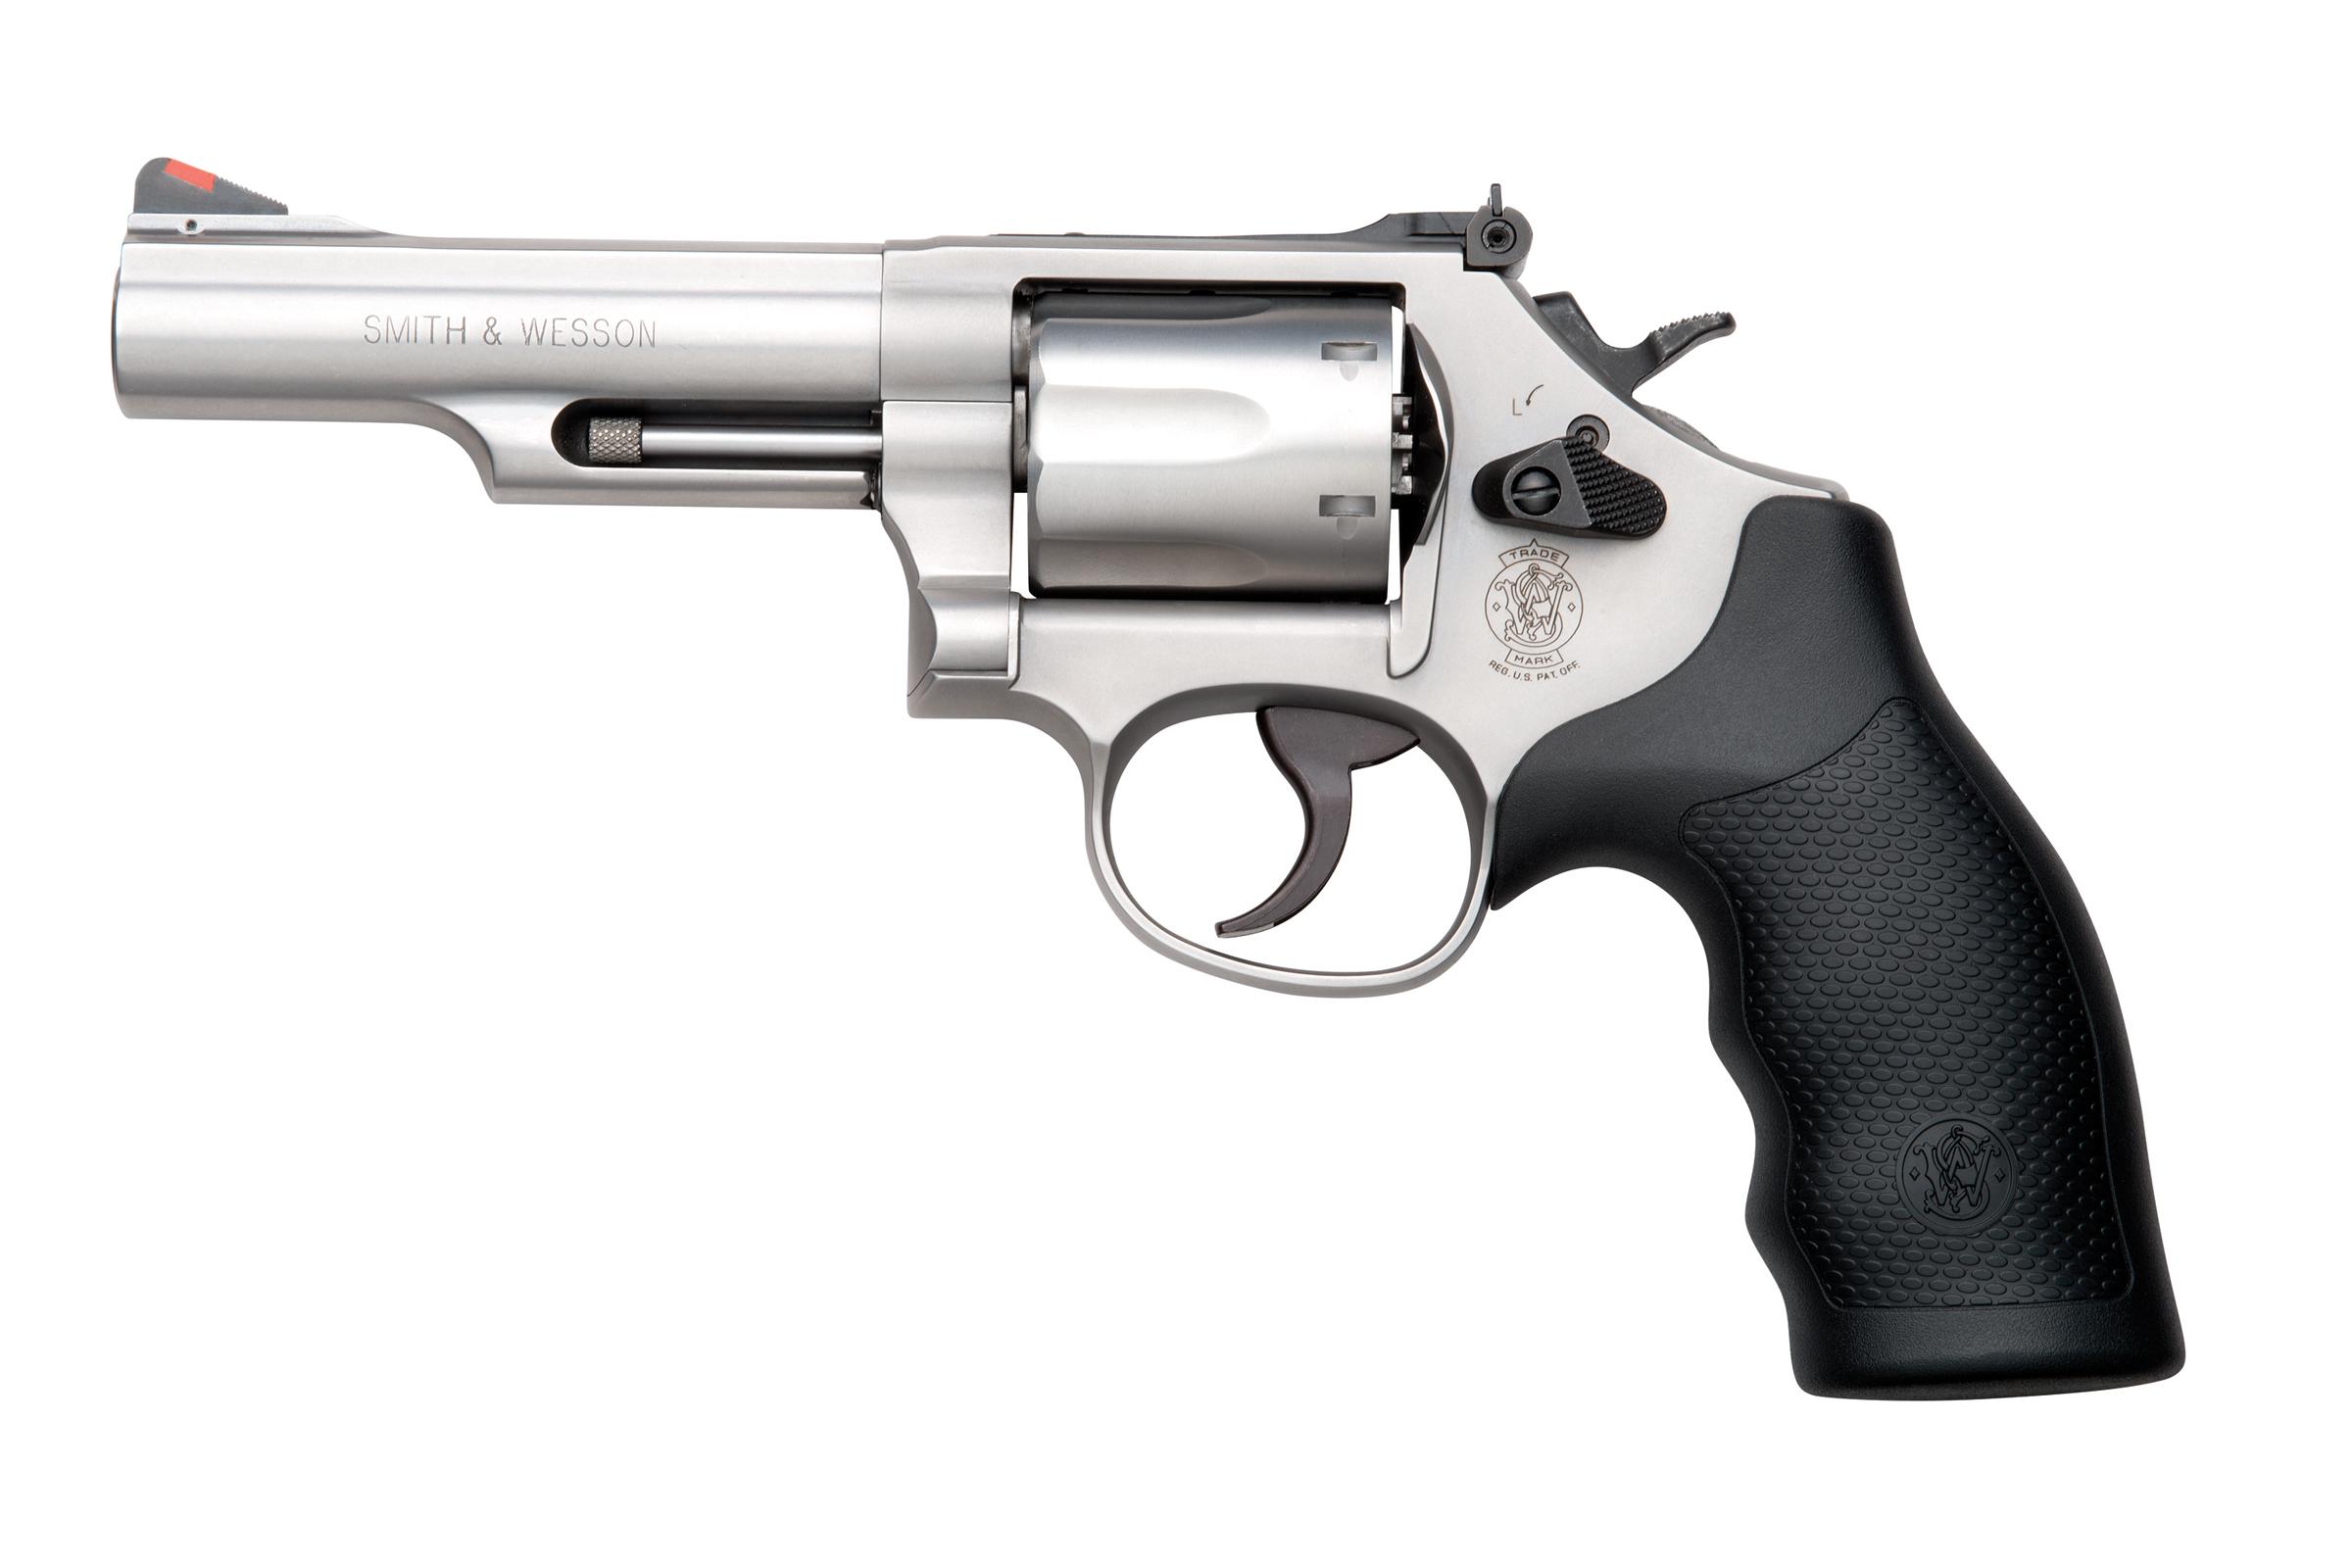  Smith & Wesson 66 4.25 